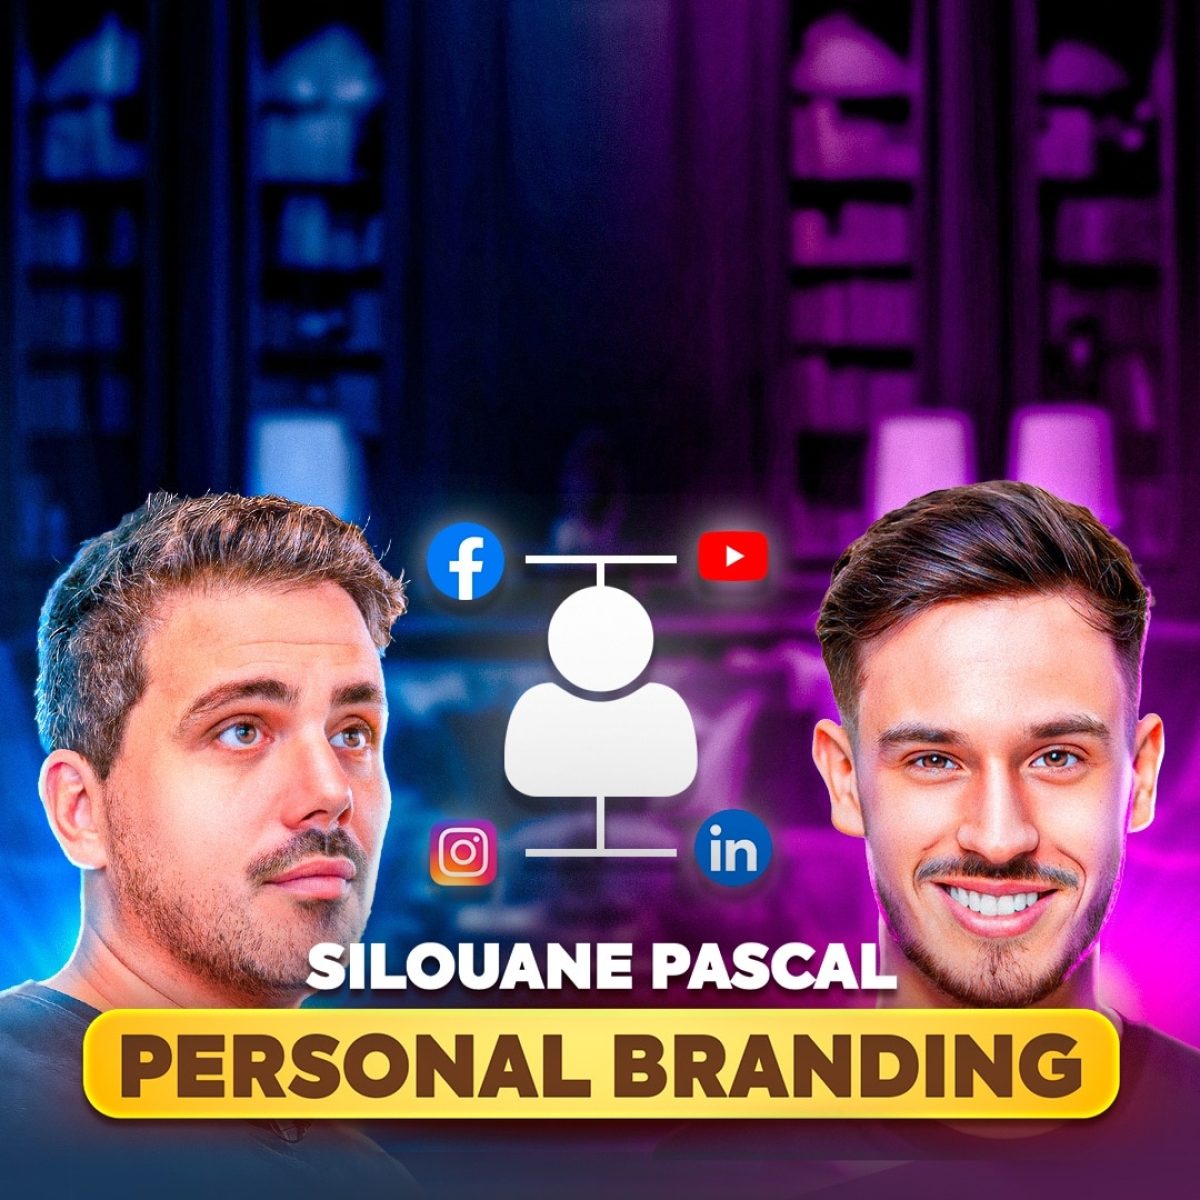 silouane pascal personal branding mastermind gerald faure